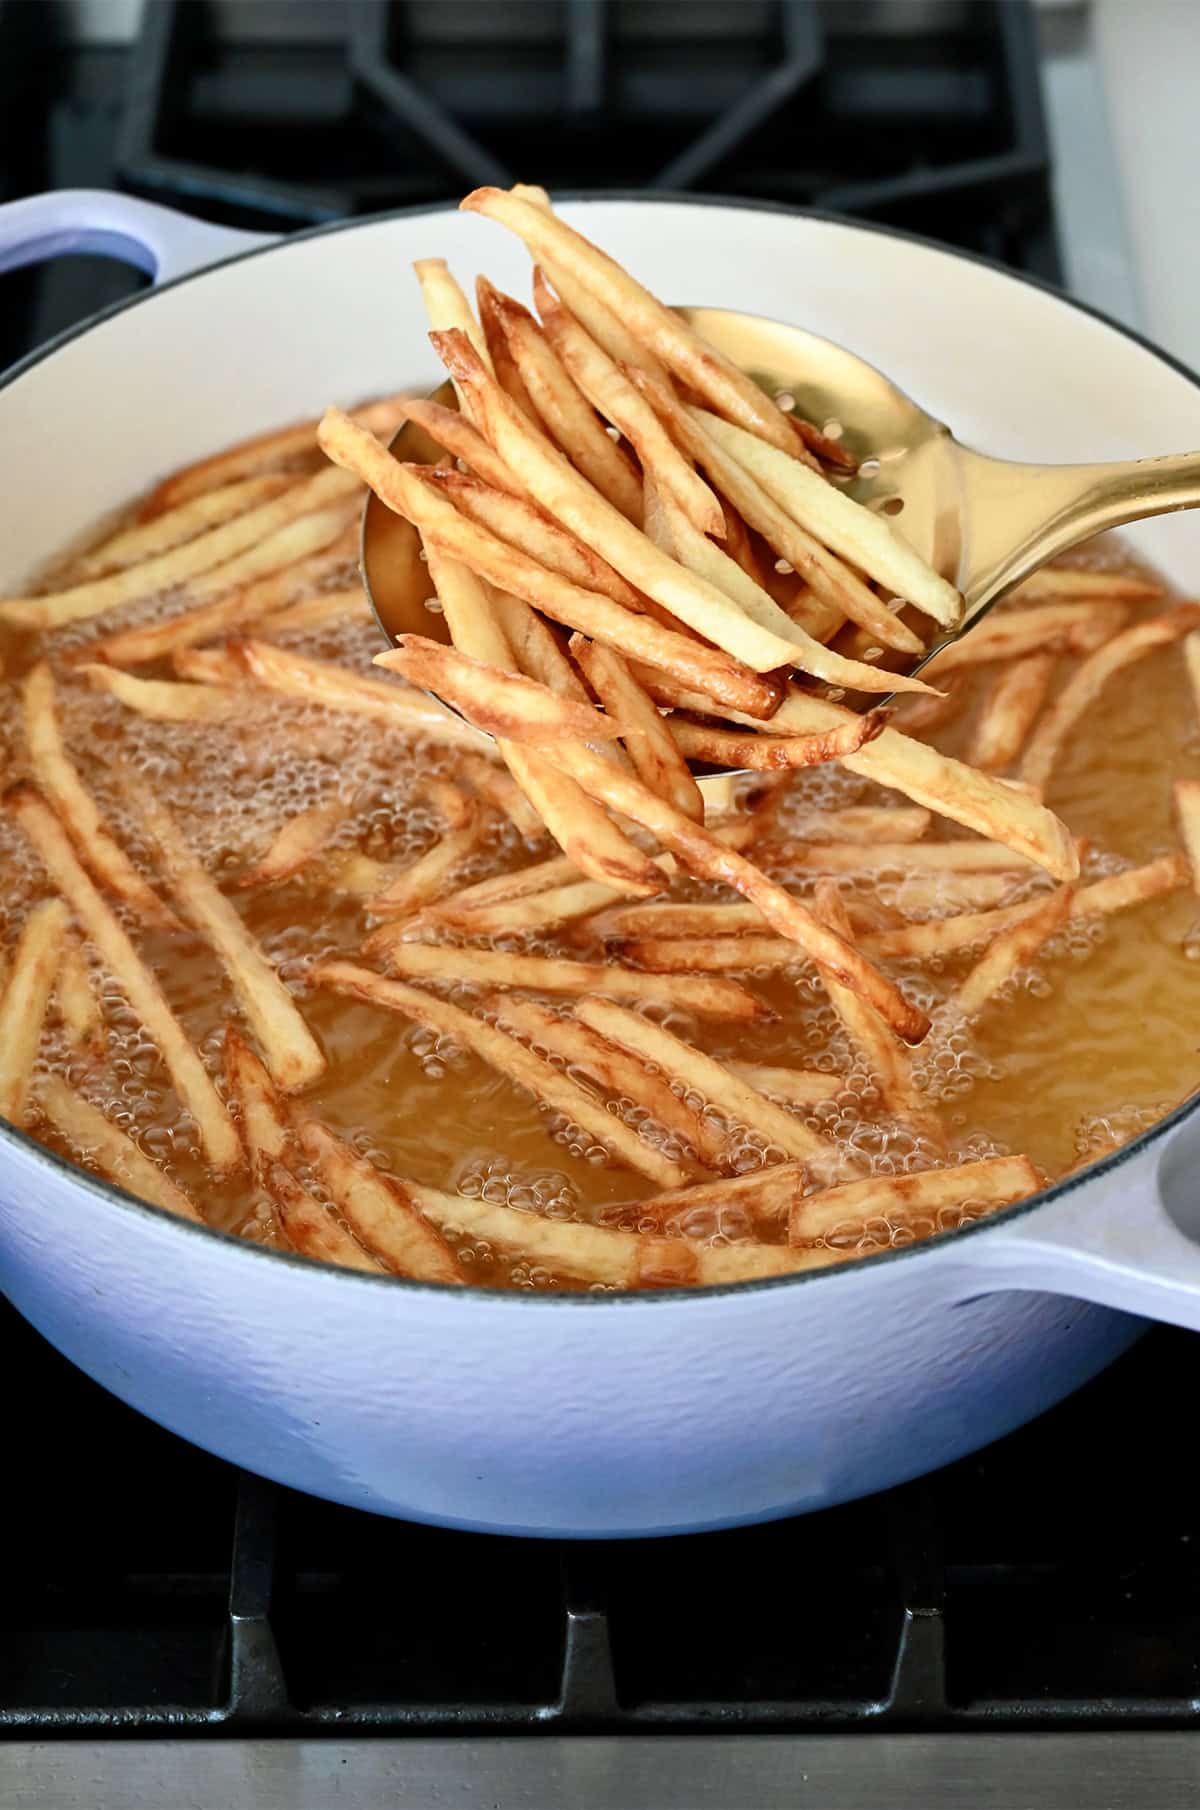 Double-fried French fries on a slotted spoon over a Dutch oven with hot oil and fries cooking.